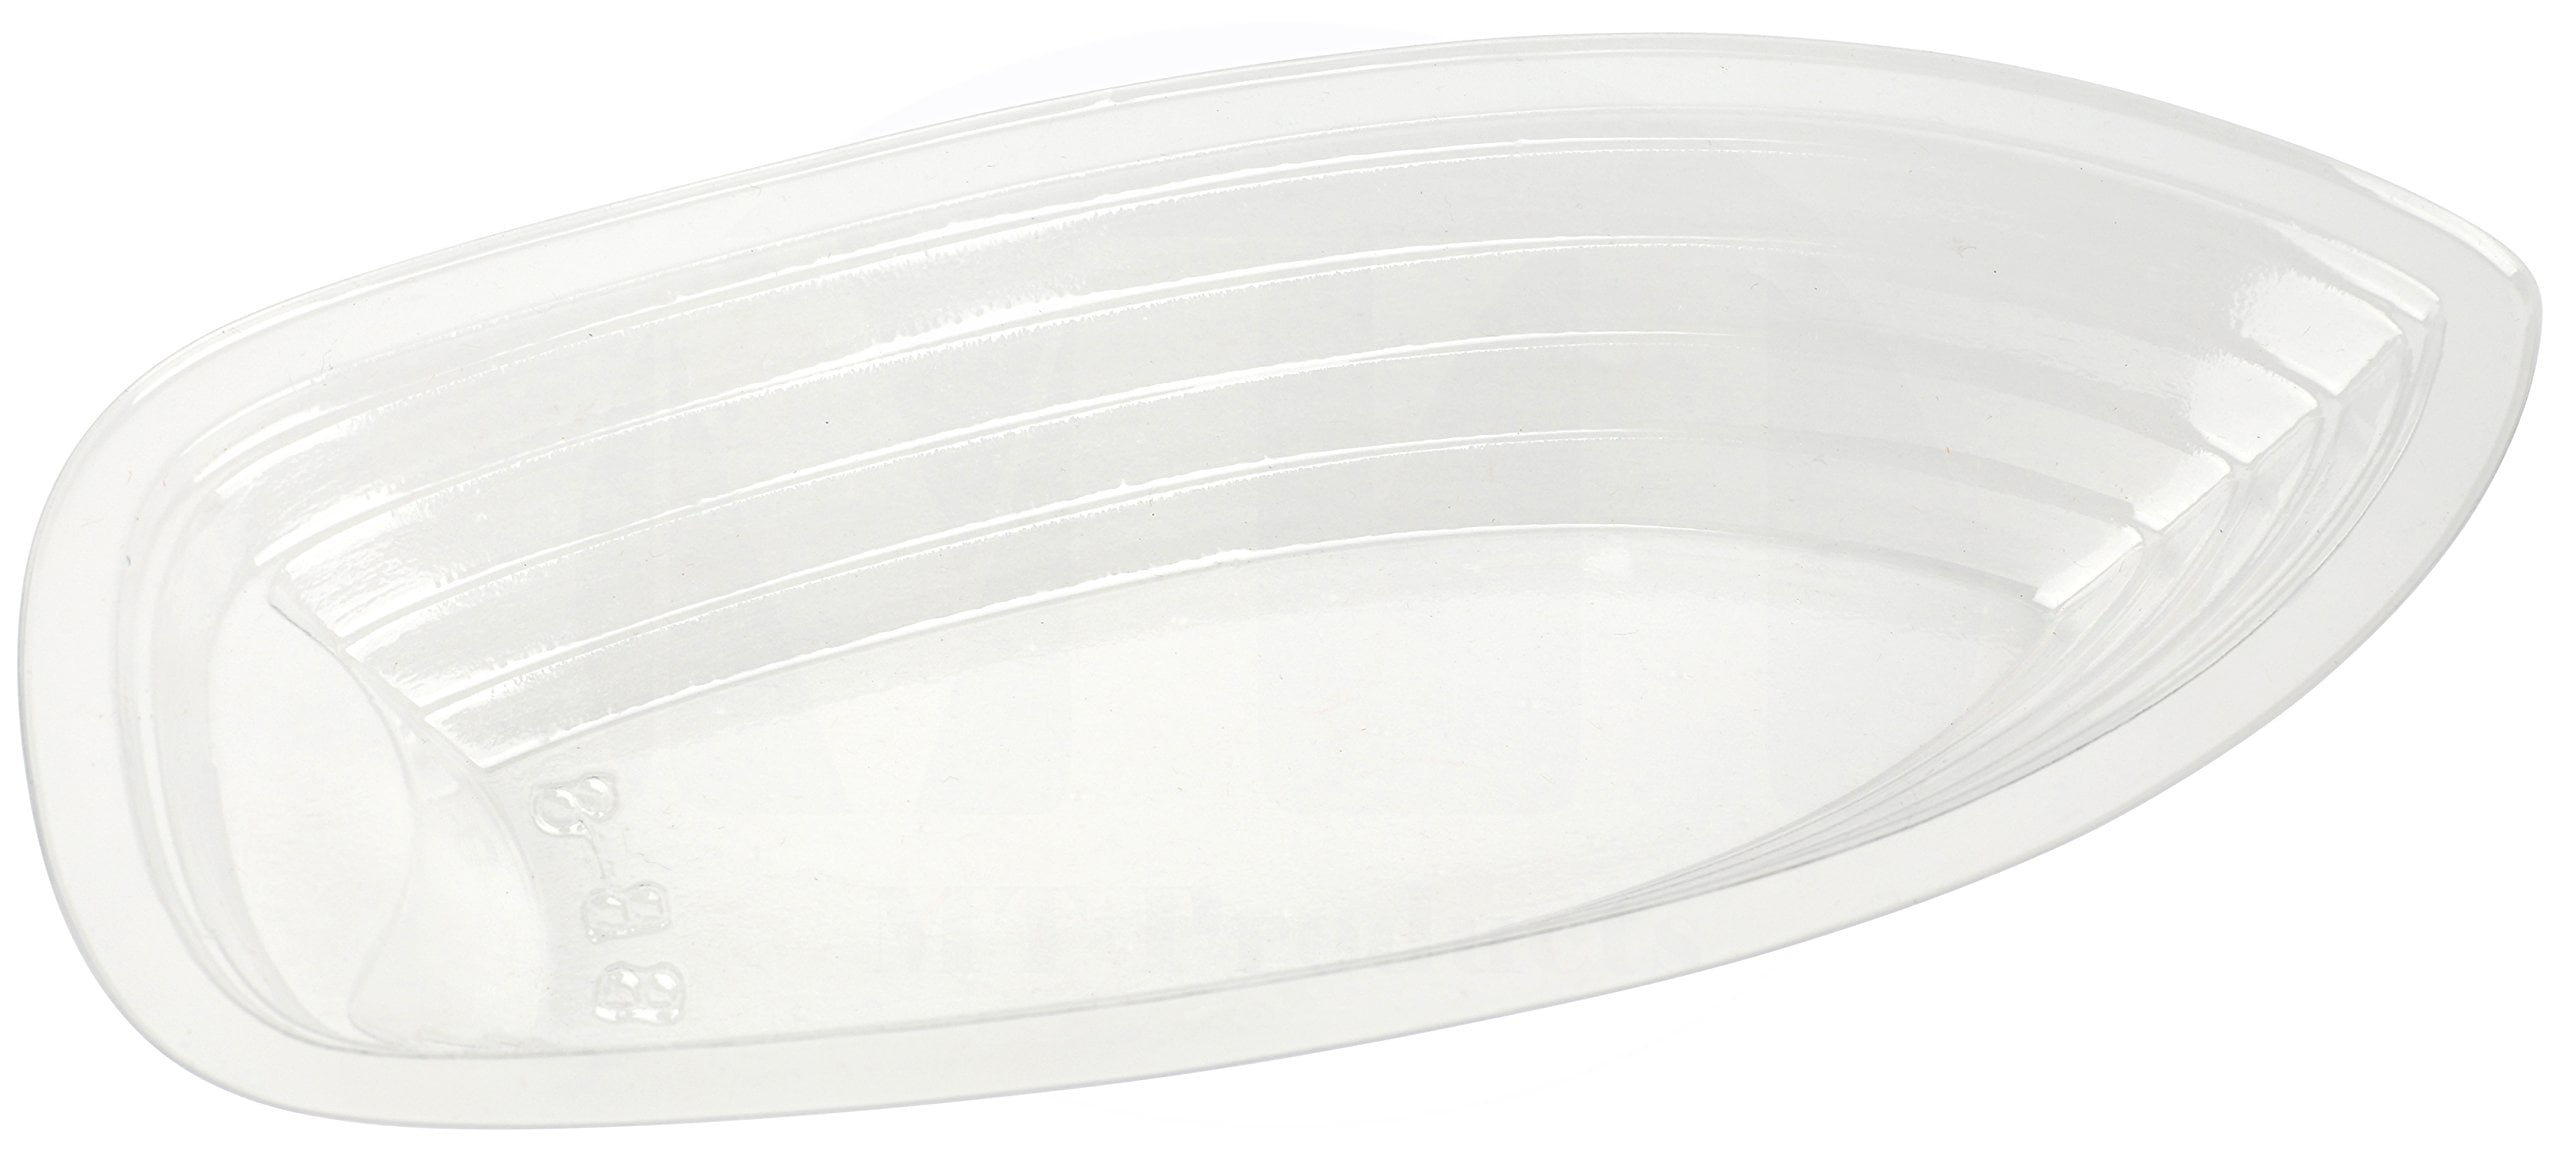 30 Pieces MT Products 12 oz Clear Plastic Disposable Banana Split Boats/Perfect Size/Great Party Dish